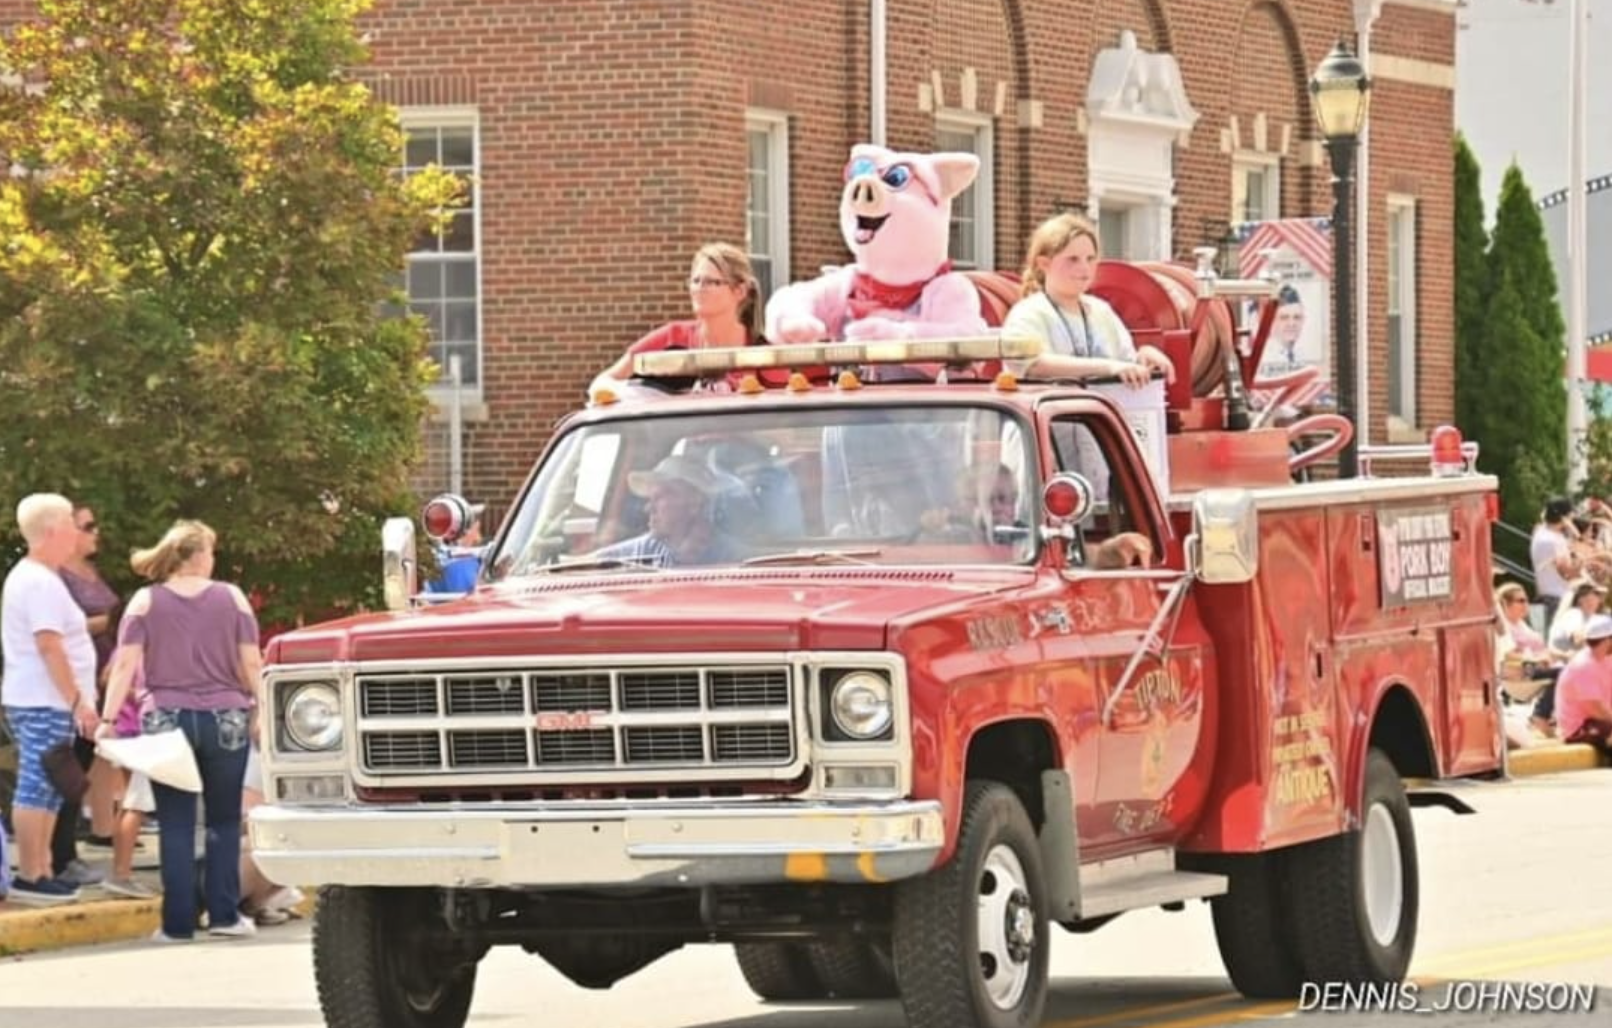 Image of pig mascot riding in fire truck